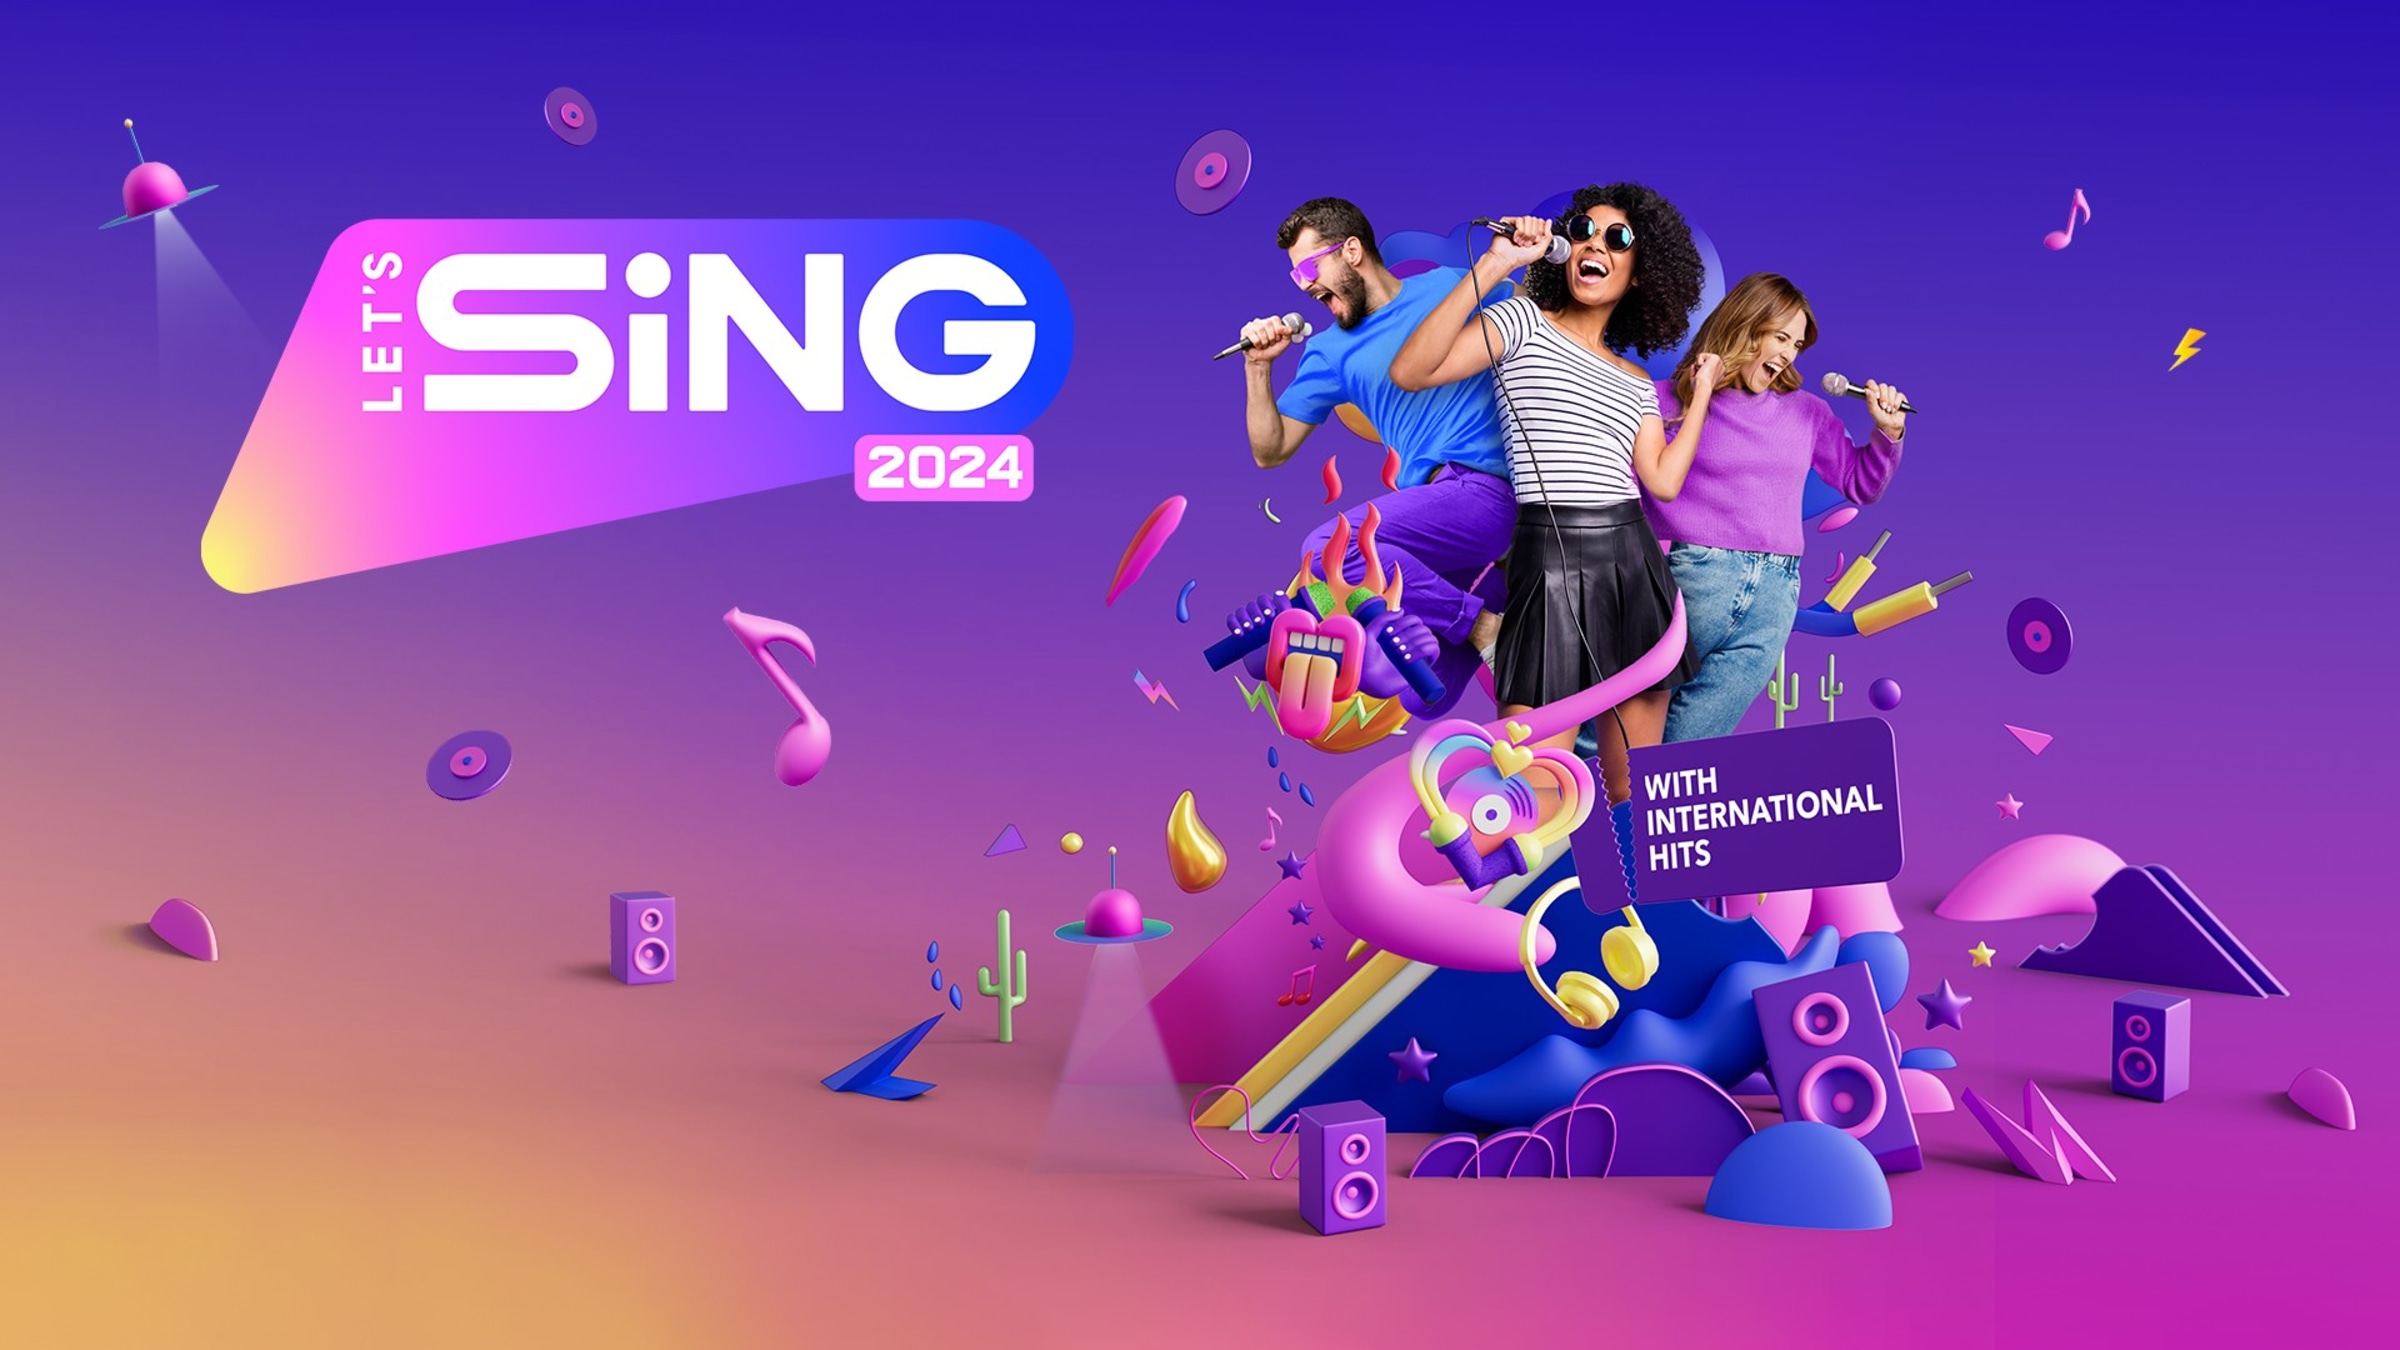 Let's Sing 2023 for Nintendo Switch - Nintendo Official Site